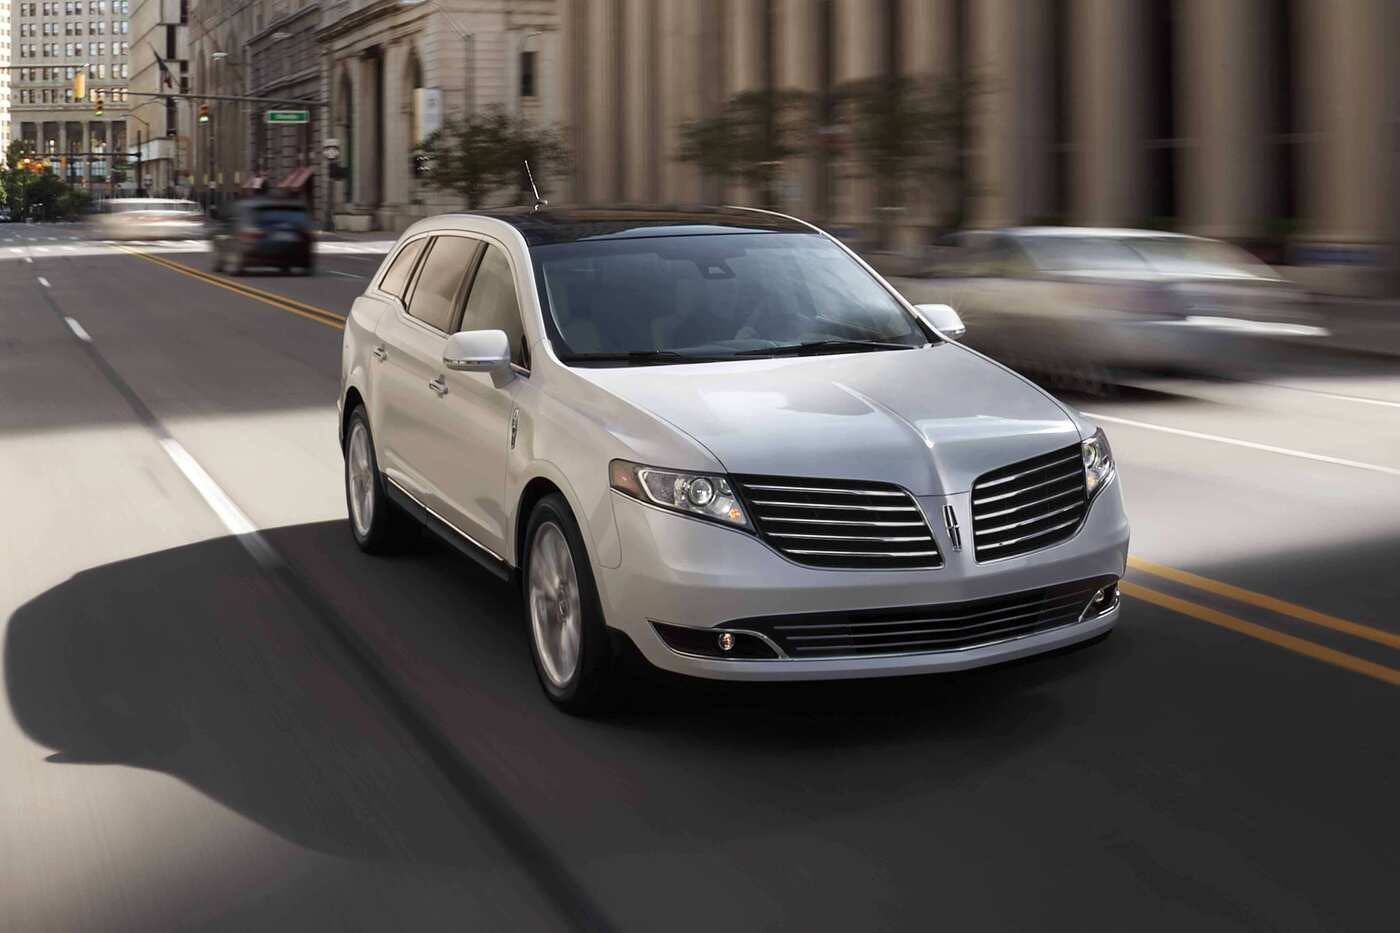 2019 Lincoln Mkt Comparisons Reviews Pictures Truecar